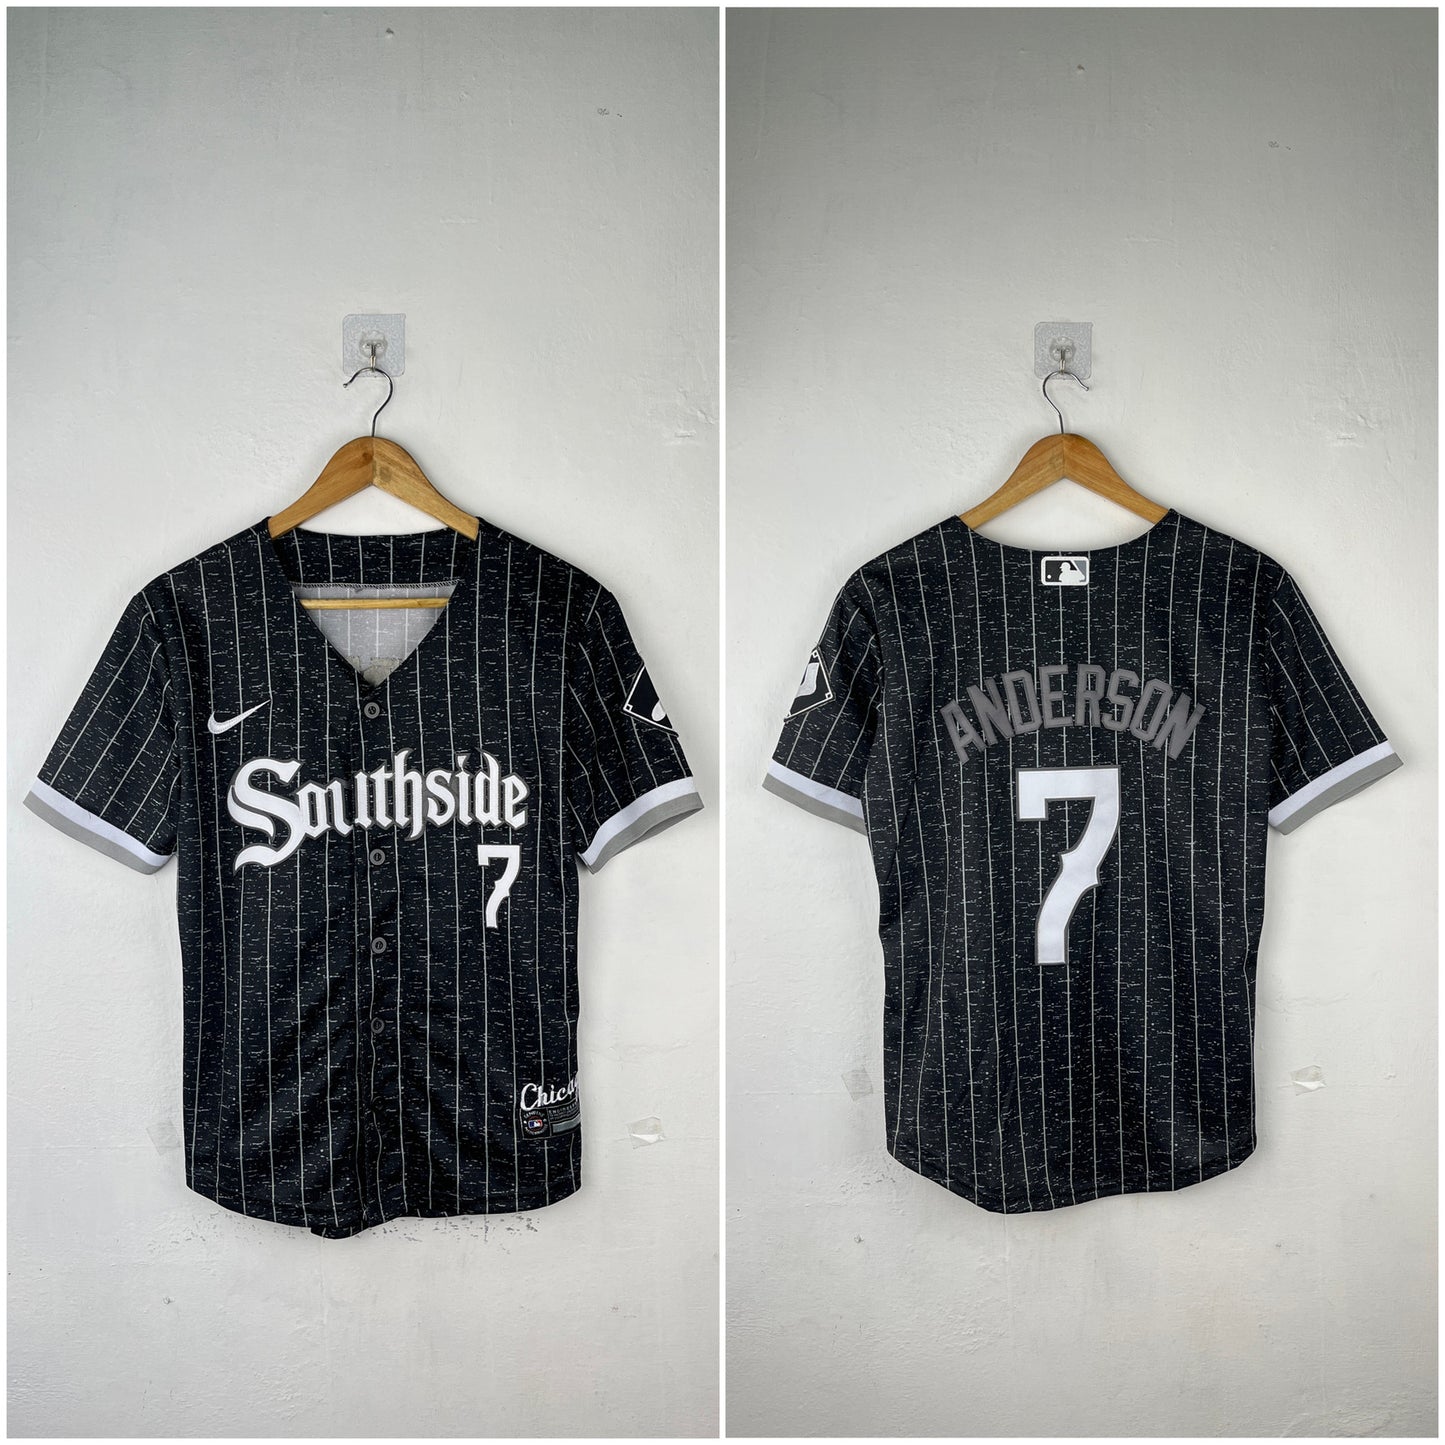 ANDERSON 7 Chicago White Sox MLB Jersey